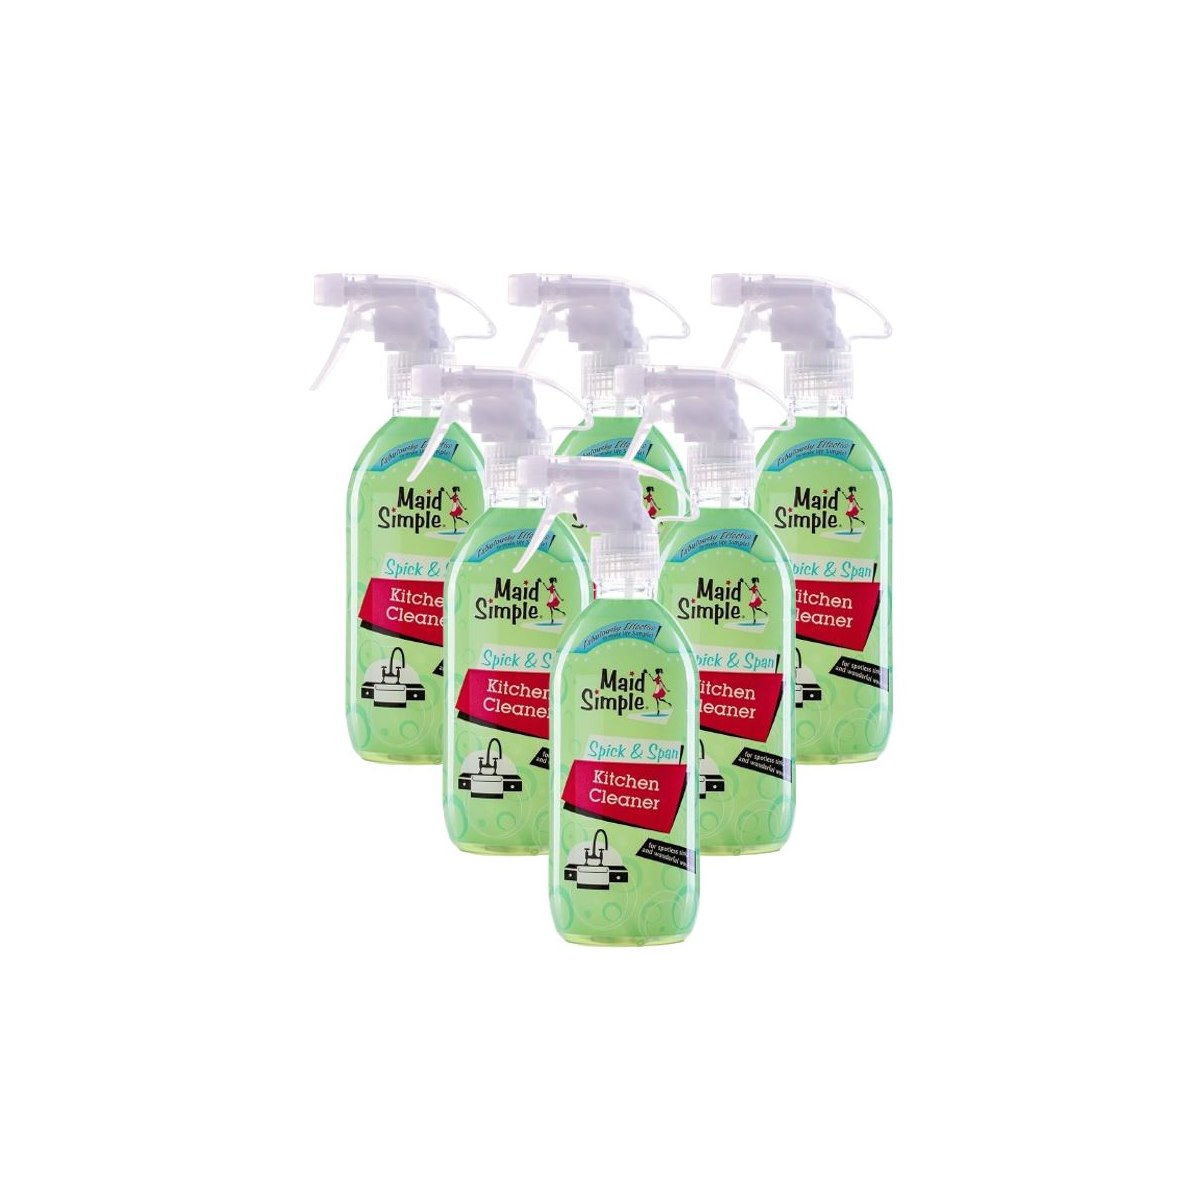 Case of 6 x Maid Simple Spick and Span Kitchen Cleaner Spray 500ml